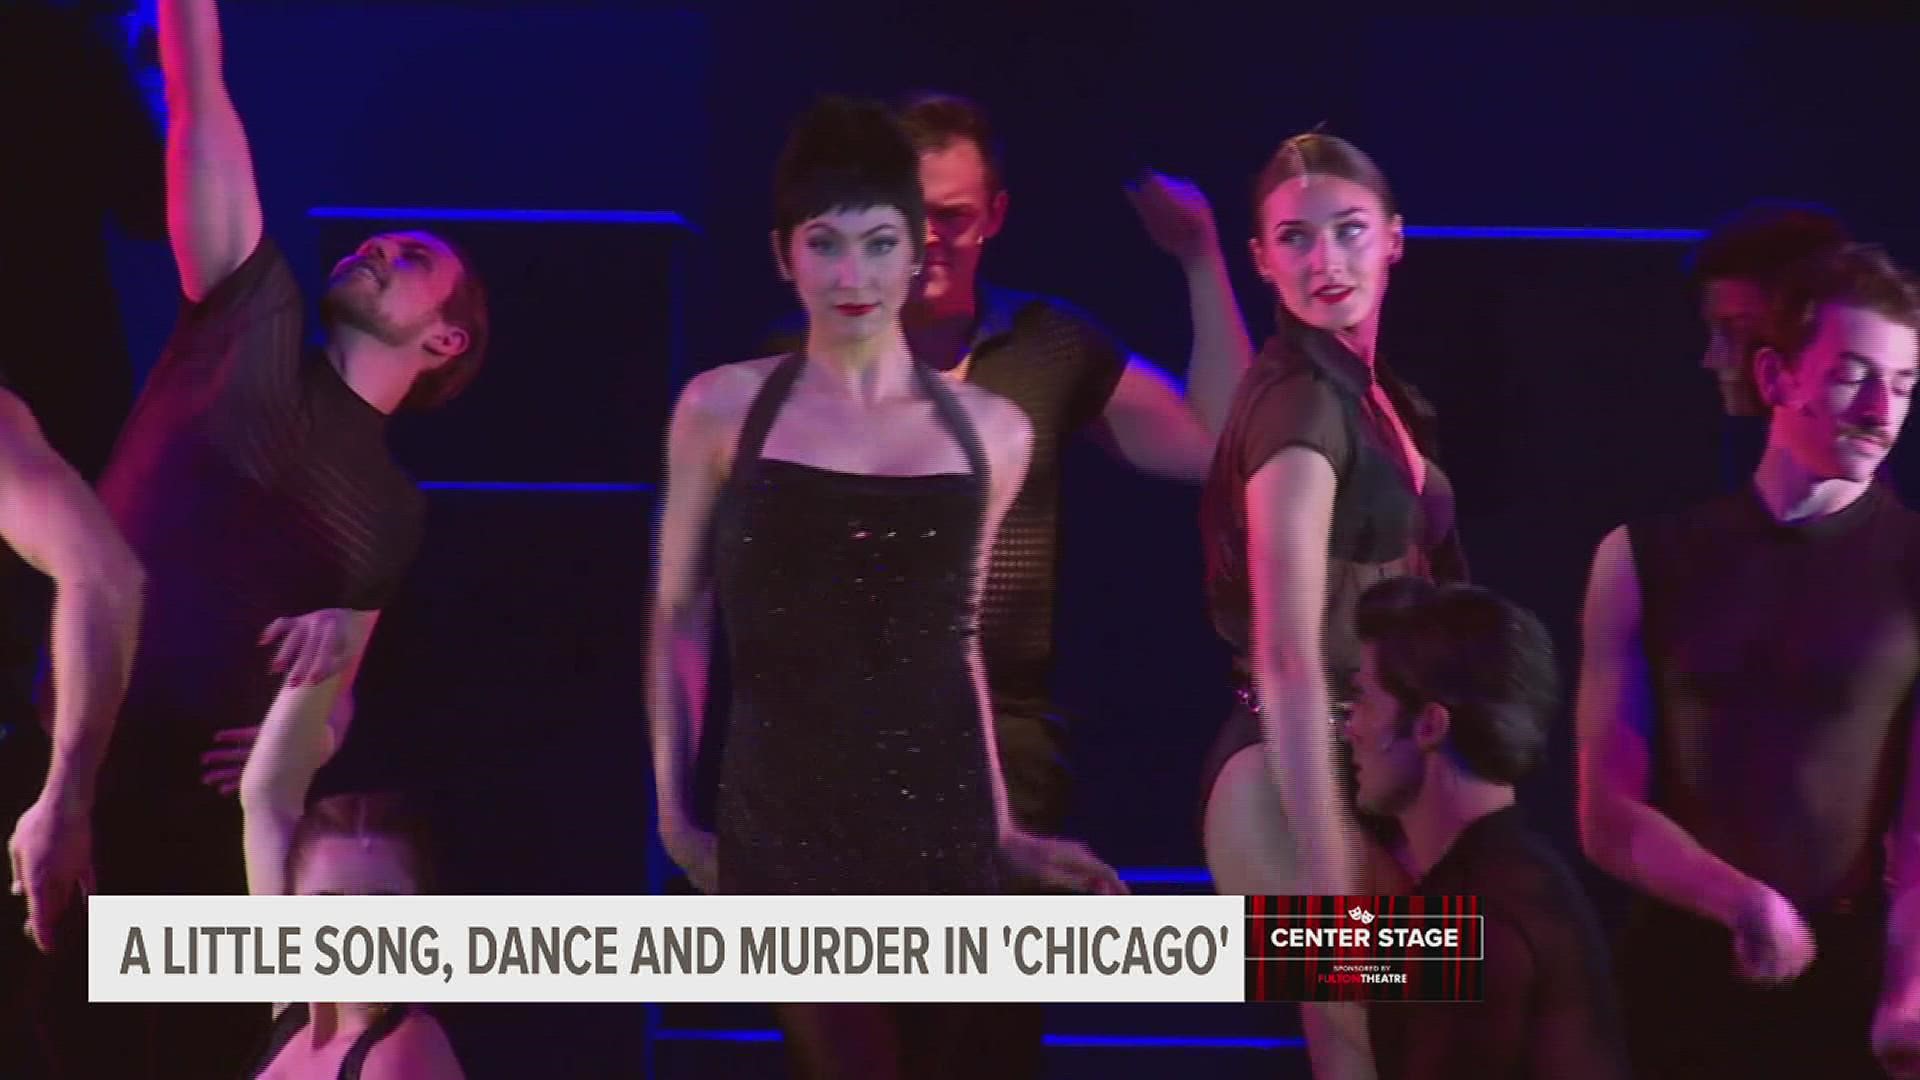 Logan Floyd, who plays Velma Kelly in the show, joined FOX43 Morning News on Aug. 26.